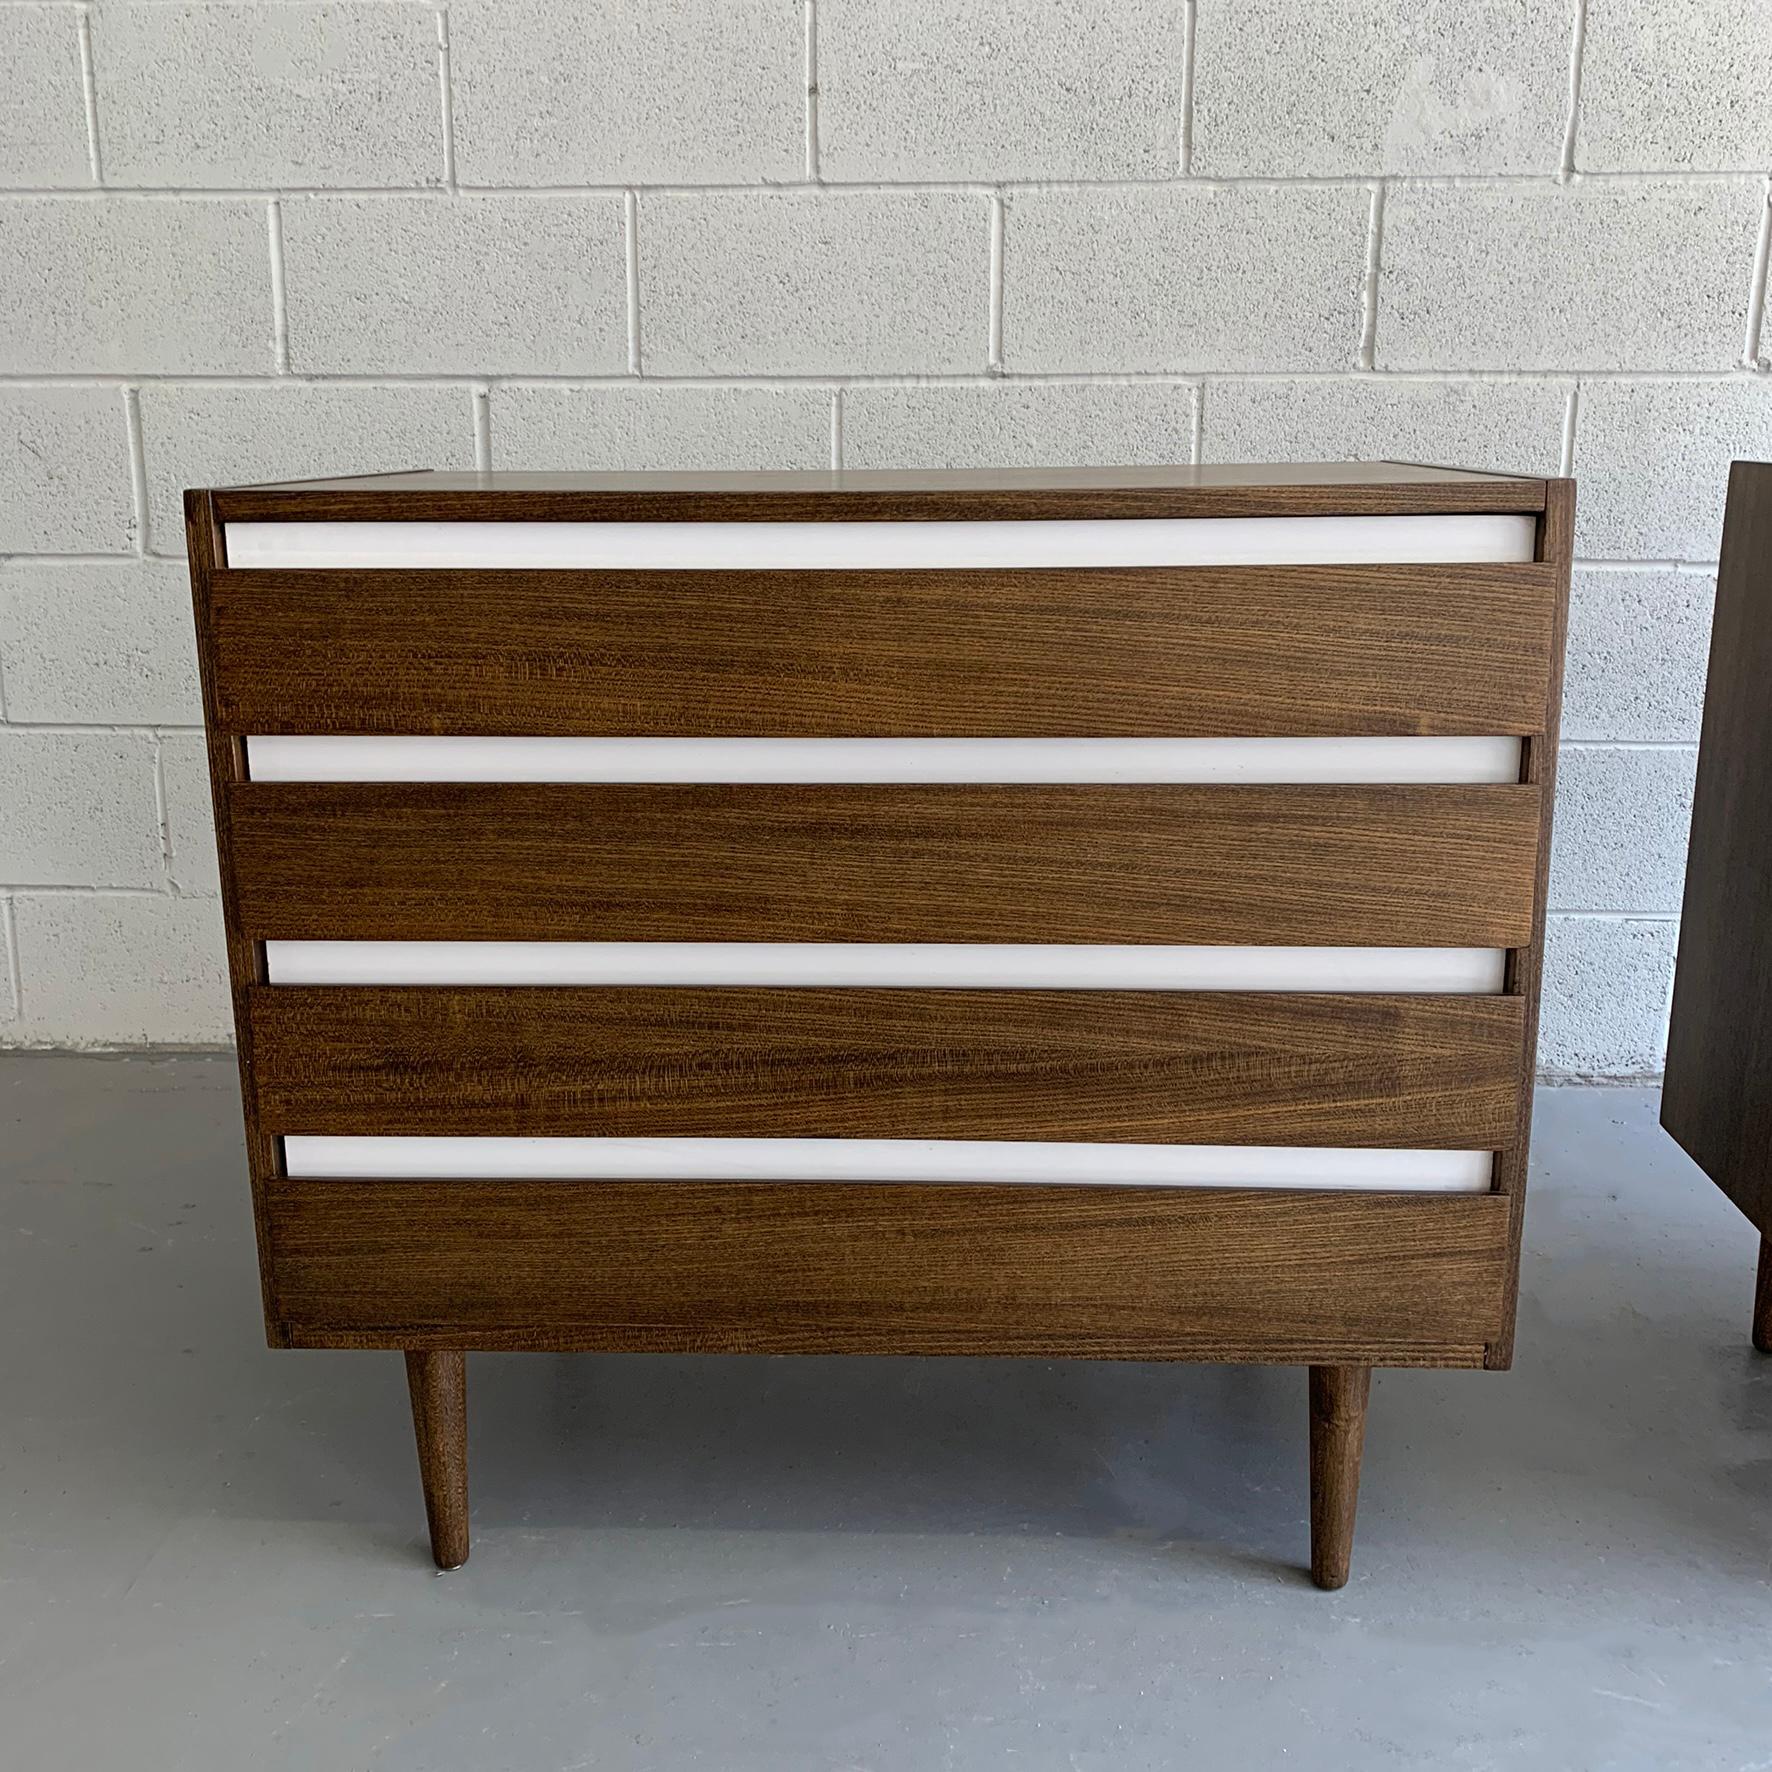 Laminate Pair of Mid-Century Modern Dresser Credenza Cabinets by American of Martinsville